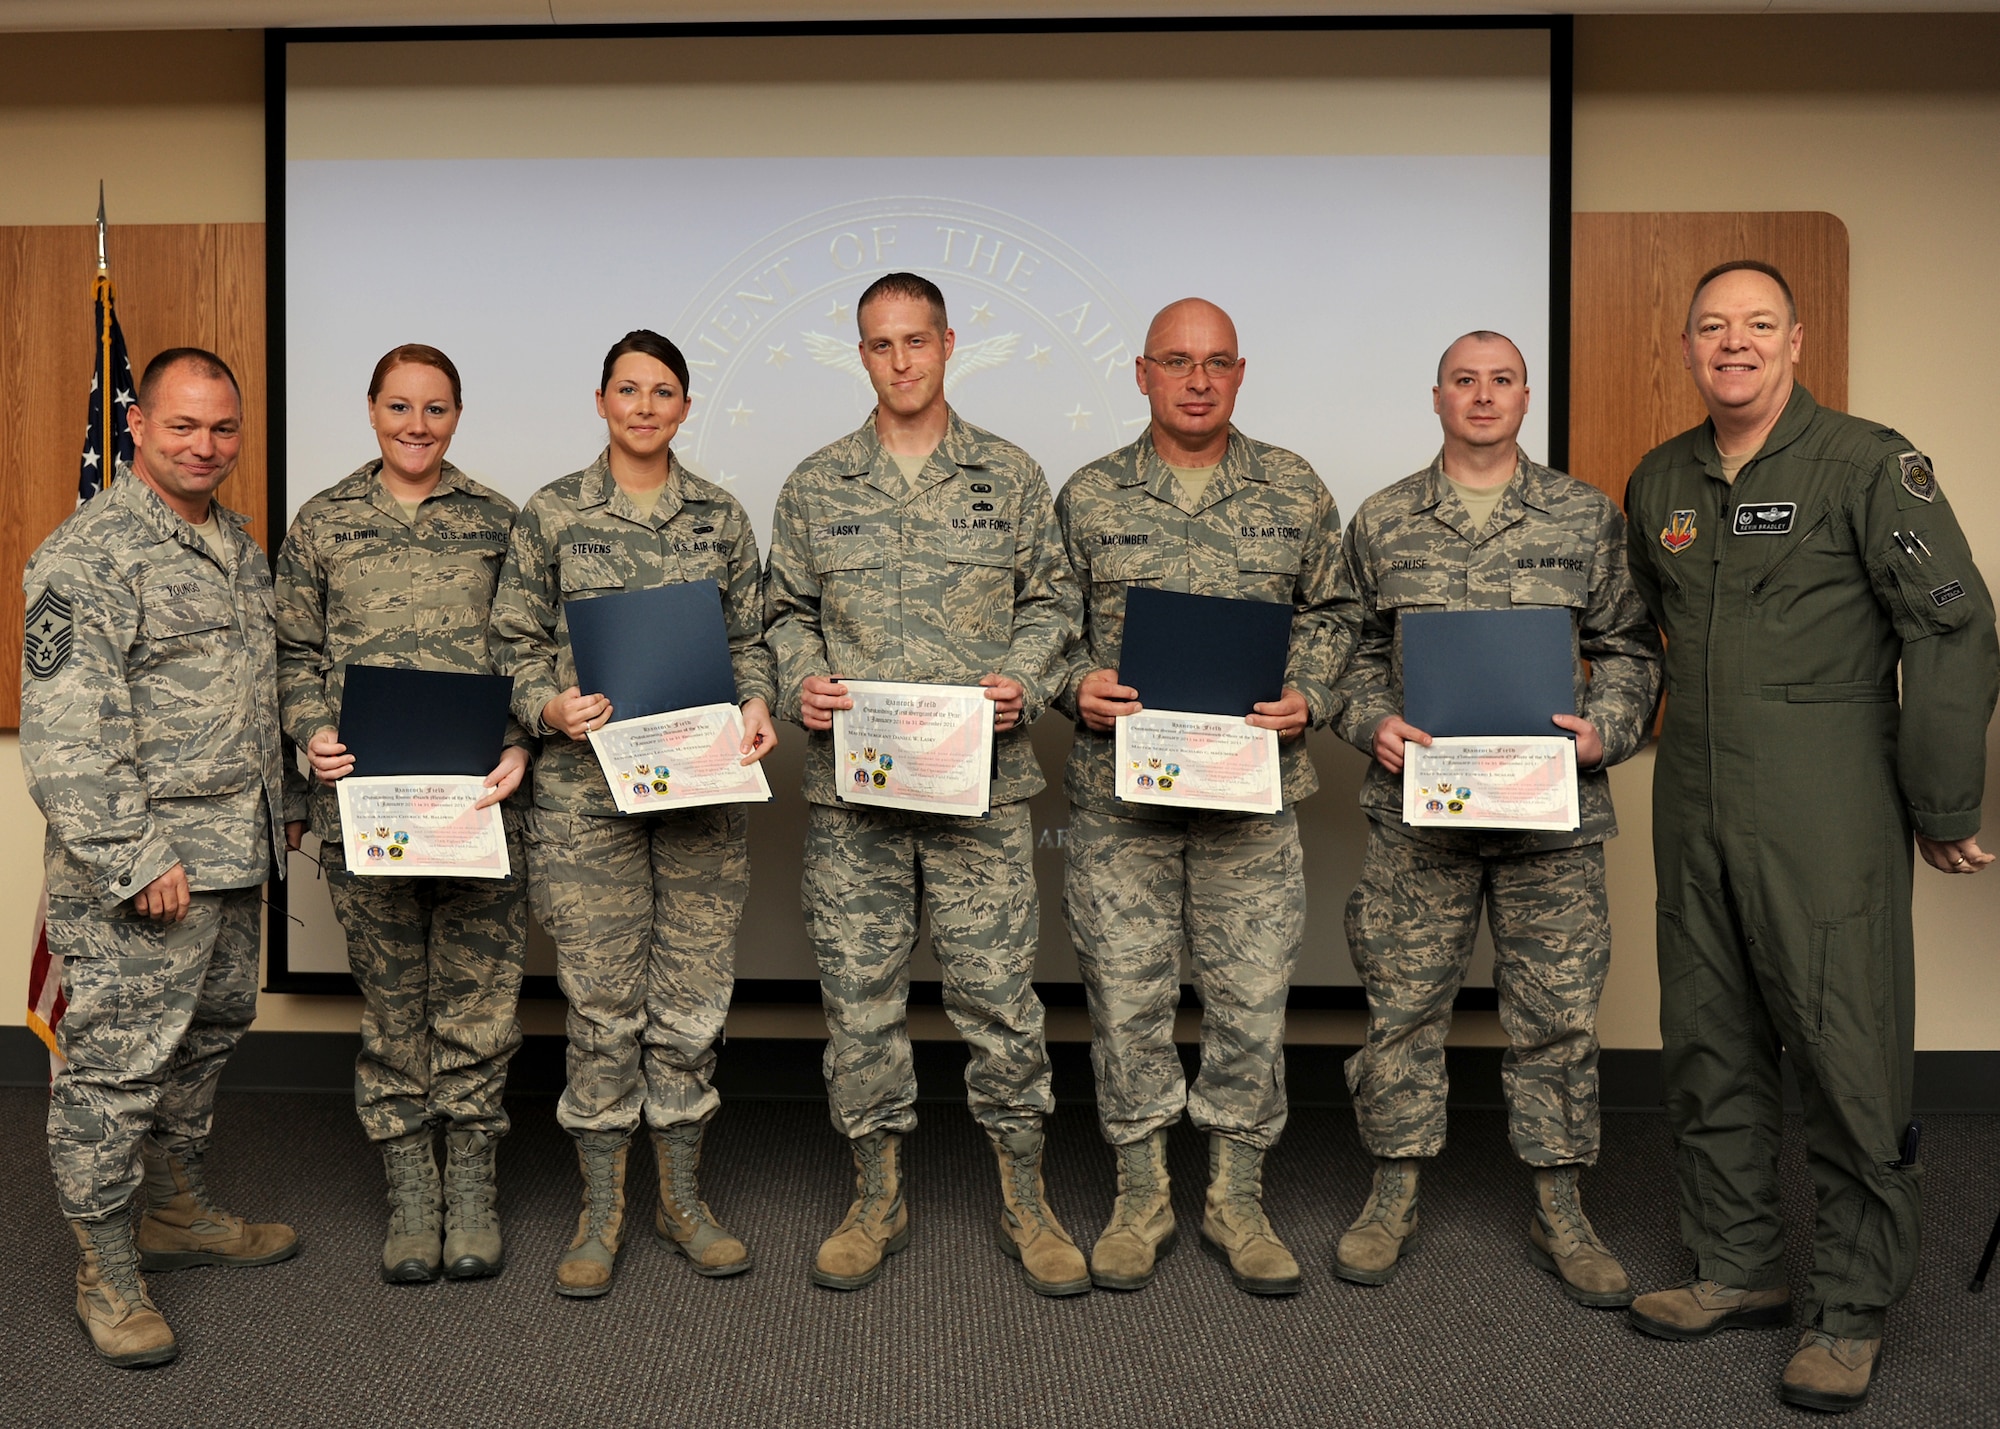 New York Air National Guard Col. Kevin Bradley (right), 174th Fighter Wing Commander, and Chief Master Sgt. Russell Youngs (left), 174th FW Command Chief, present Airmen of the Year awards to Hancock Field ANG Base personnel (from left to right) Senior Airman Cherice Baldwin, Senior Airman LeAnne Stevens, Master Sgt. Daniel Lasky, Master Sgt. Richard Macumber, and Staff Sgt. Edward Scalise on 7 January 2012.  The awards represented outstanding performance at the levels of Airman, NCO, Senior NCO, First Sergeant, and Honor Guard categories. (U.S. Air Force photo by Tech Sgt. Ricky Best/RELEASED)